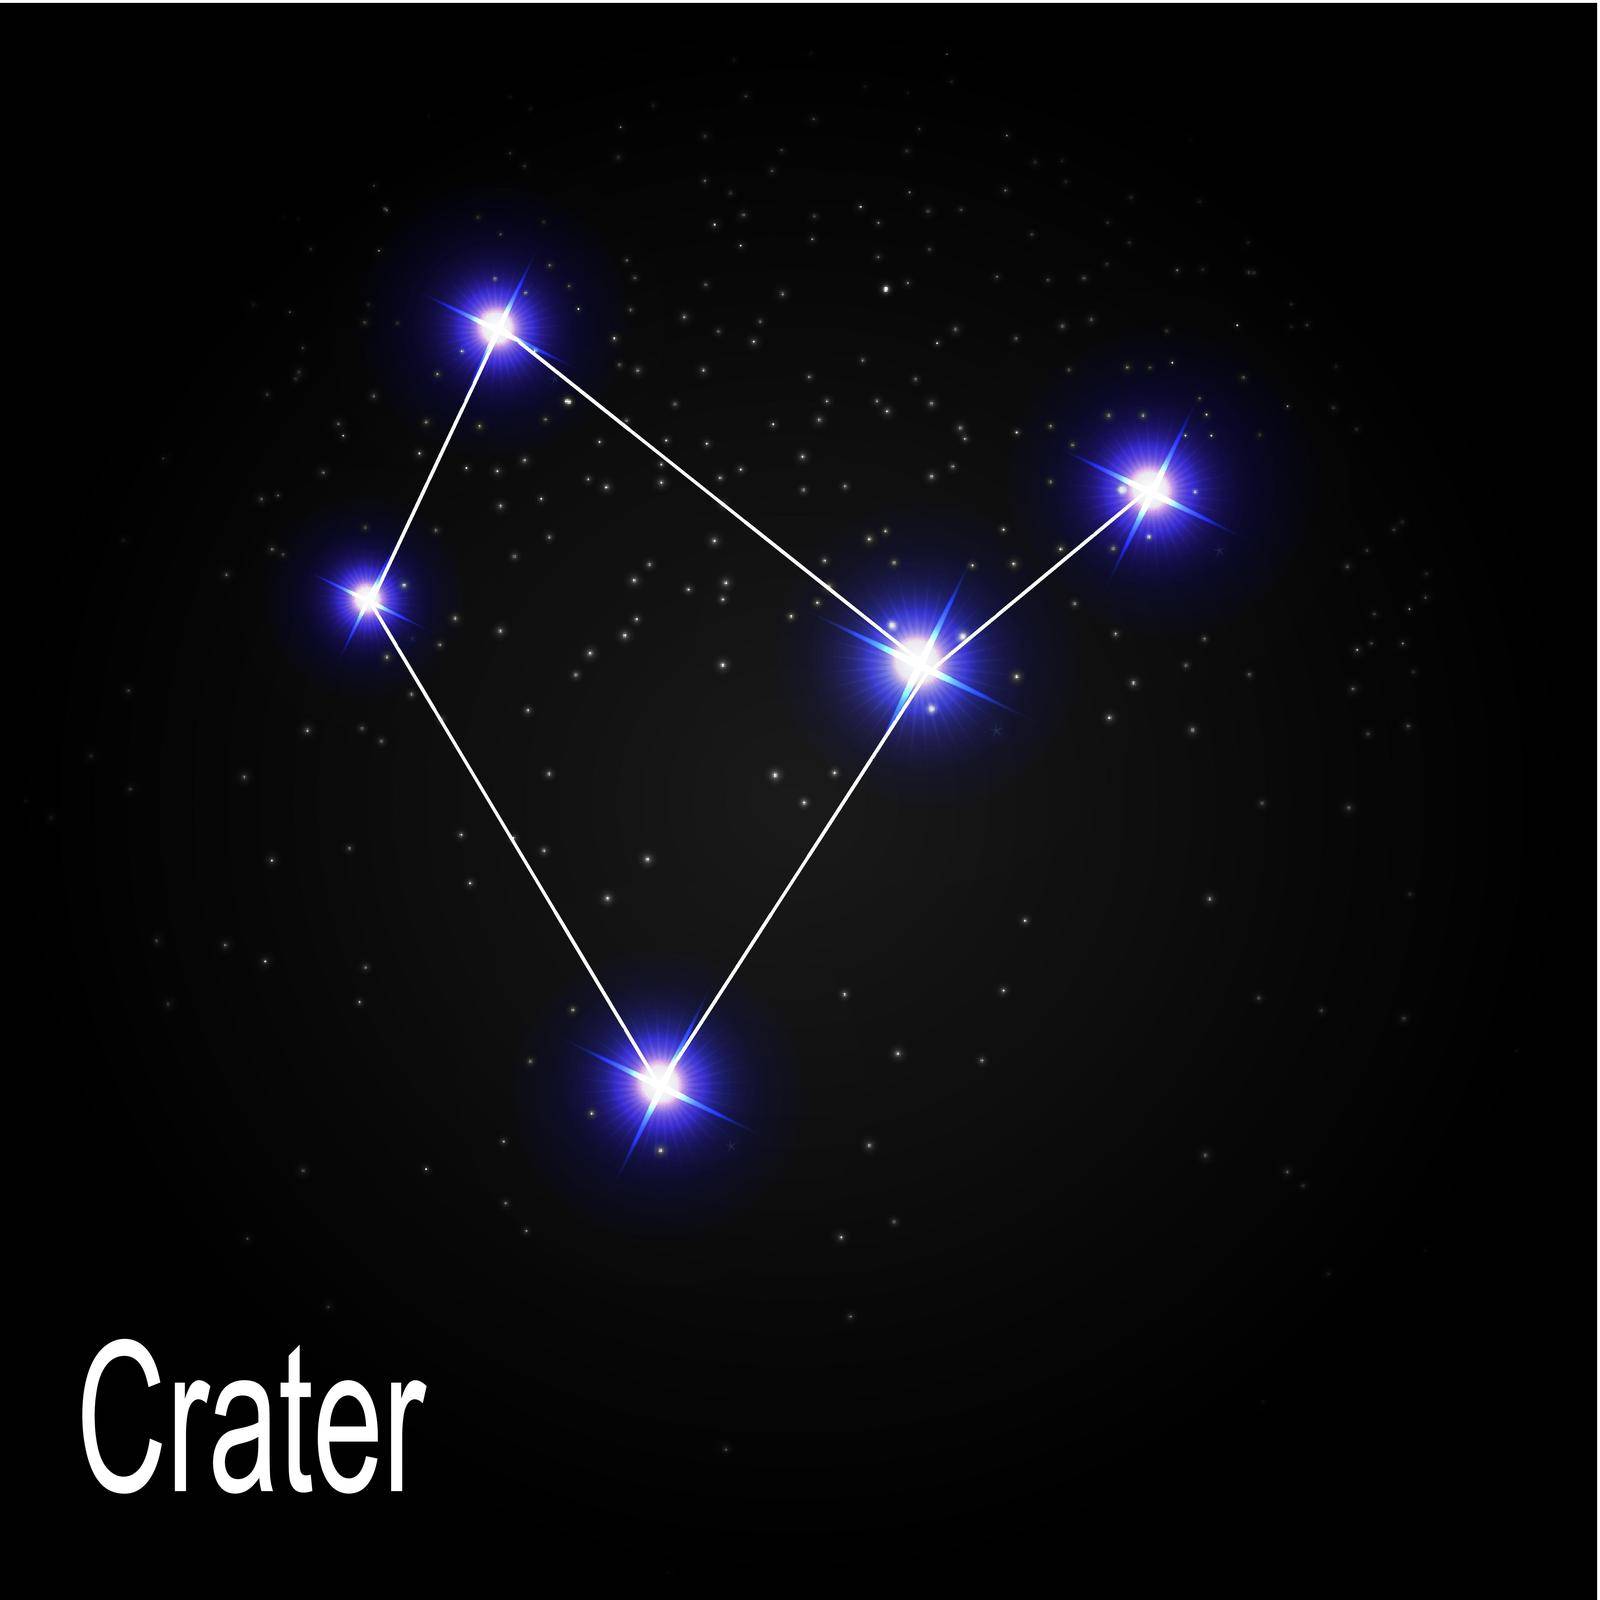 Crater Constellation with Beautiful Bright Stars on the Background of Cosmic Sky Vector Illustration EPS10